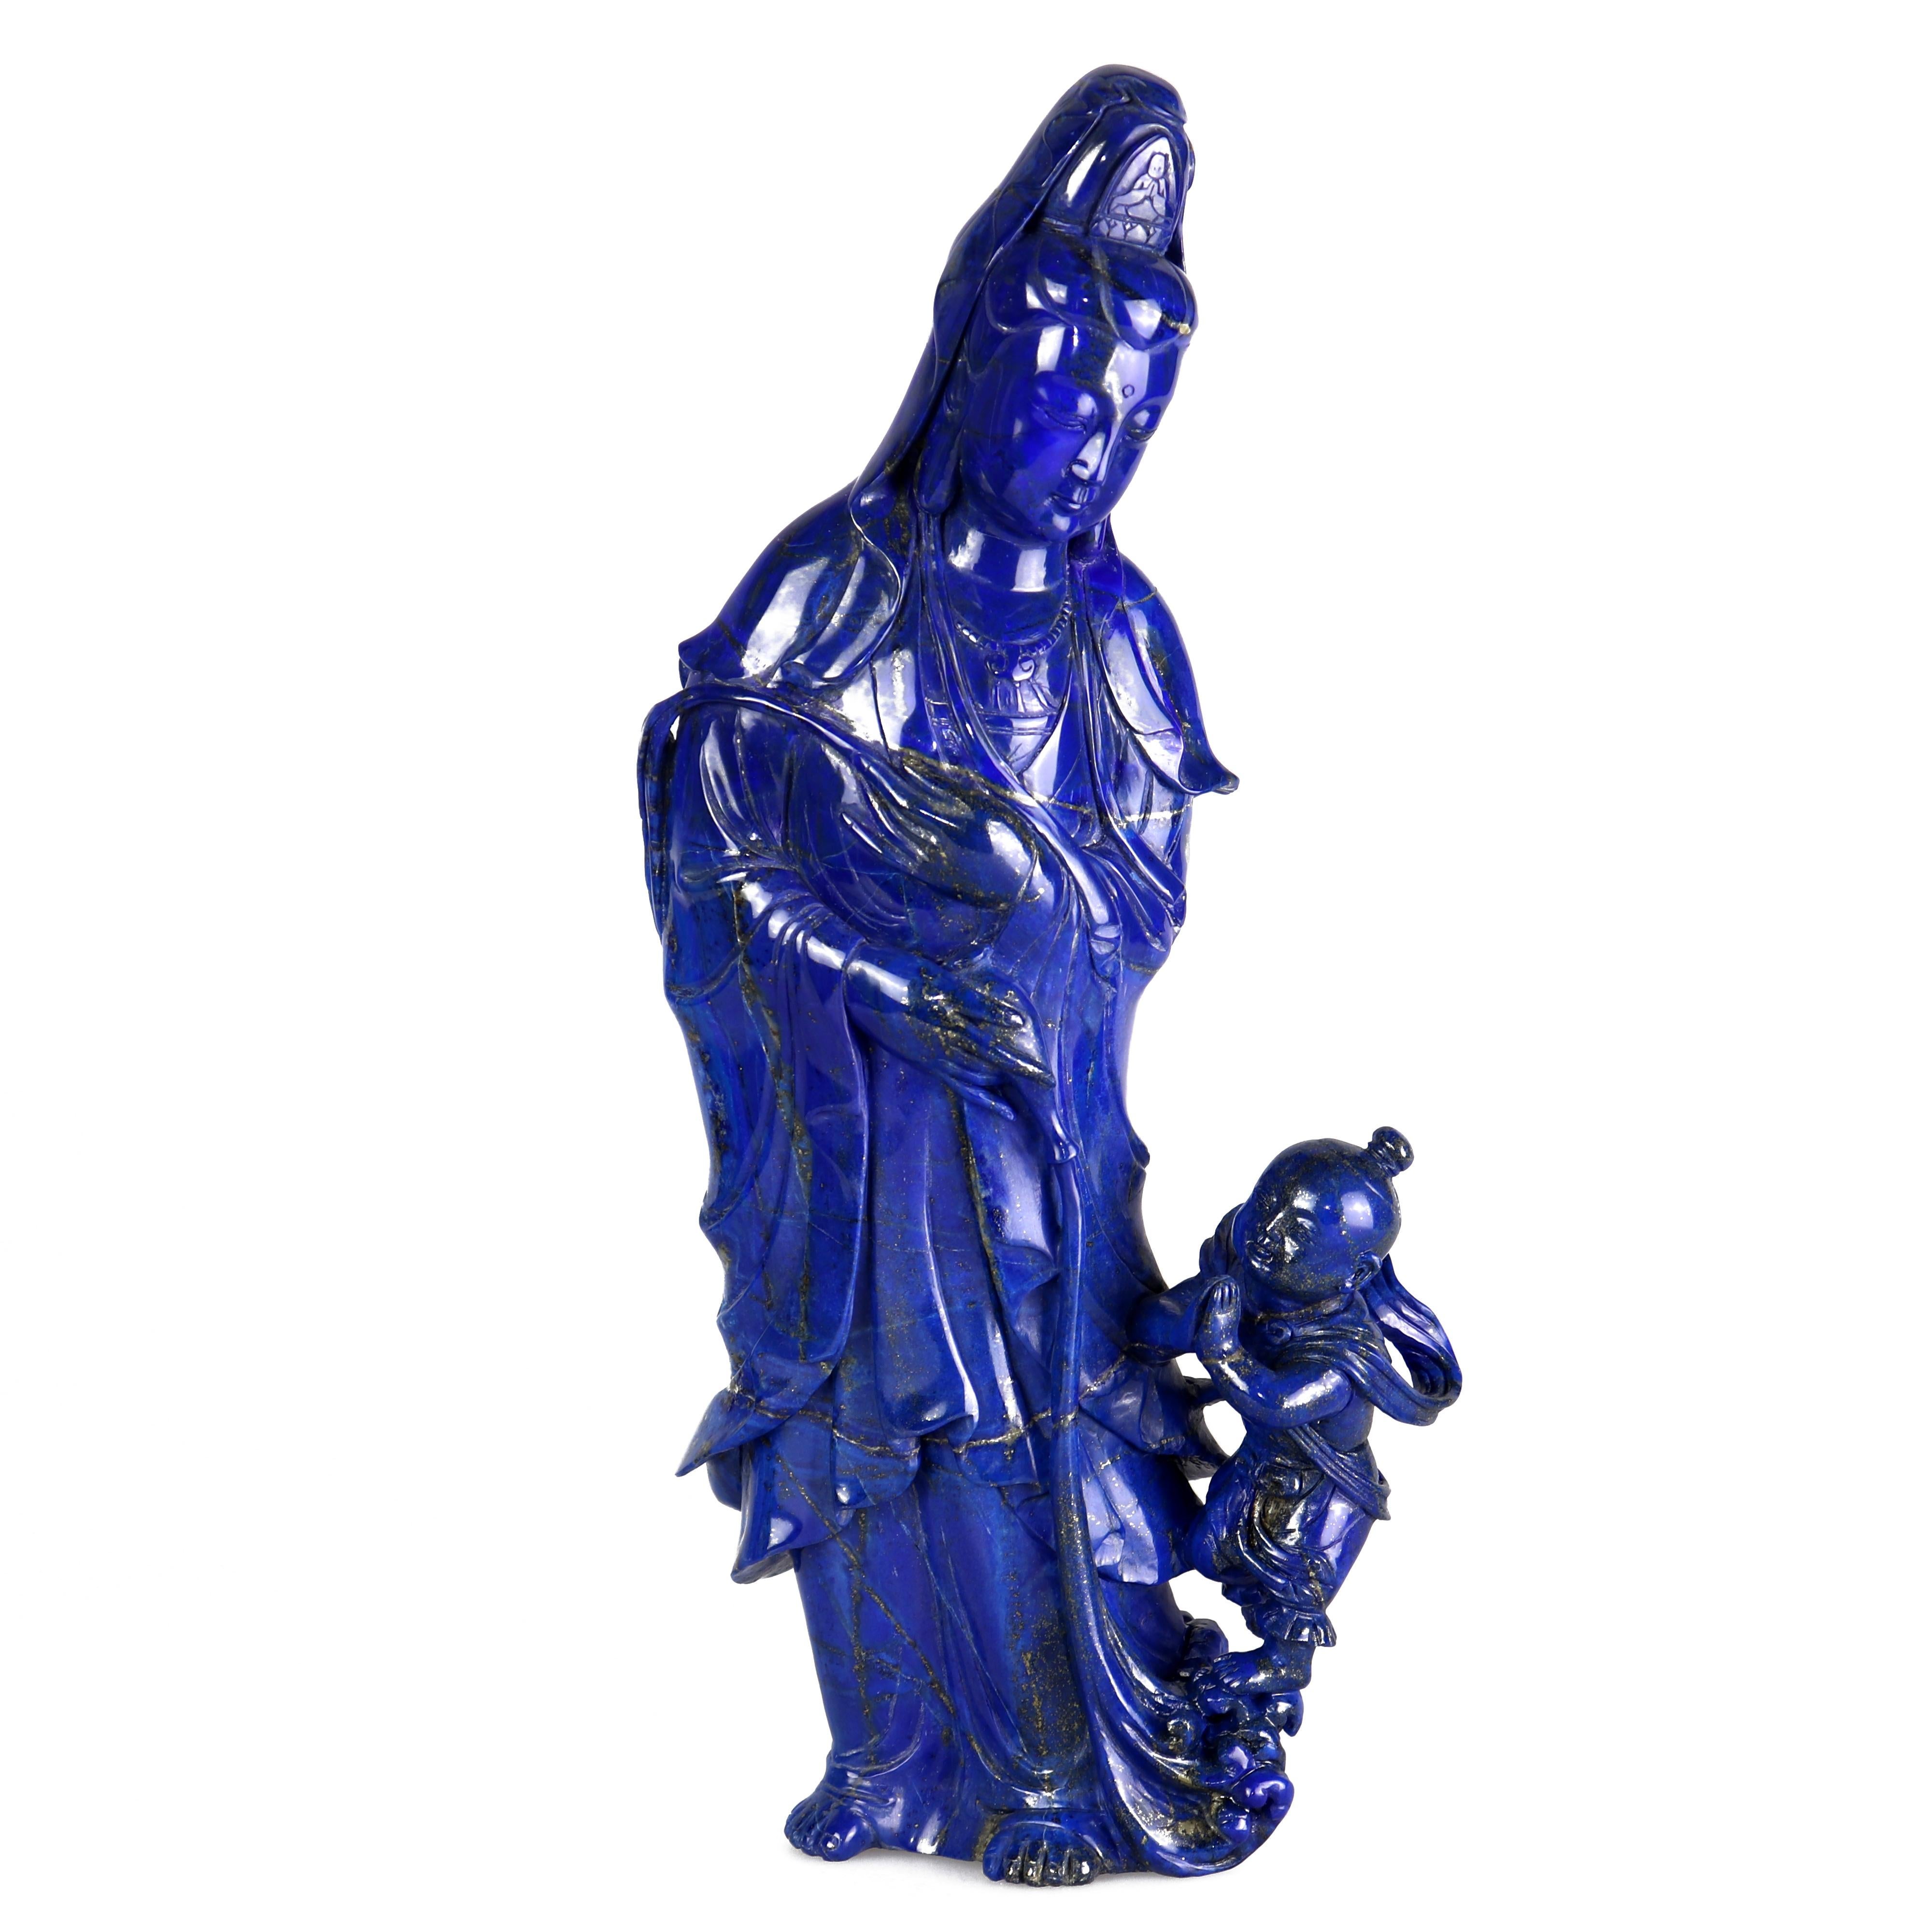 Chinese Export Lapis Lazuli Holy Virgin with Child Figurine Carved Blue Statue Sculpture For Sale